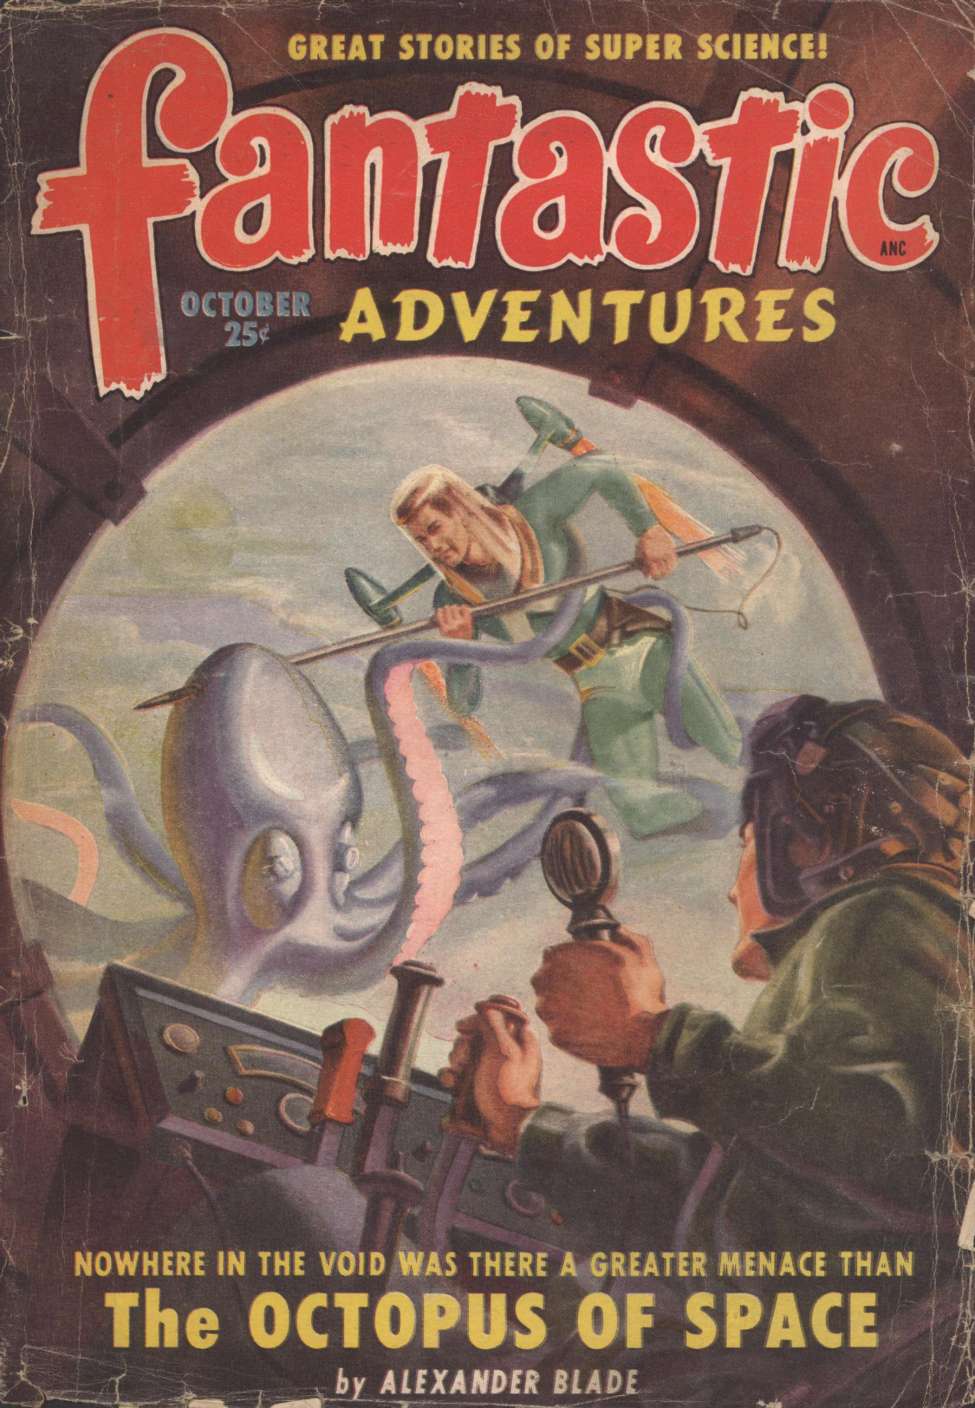 Comic Book Cover For Fantastic Adventures v11 10 - The Octopus of Space - Alexander Blade